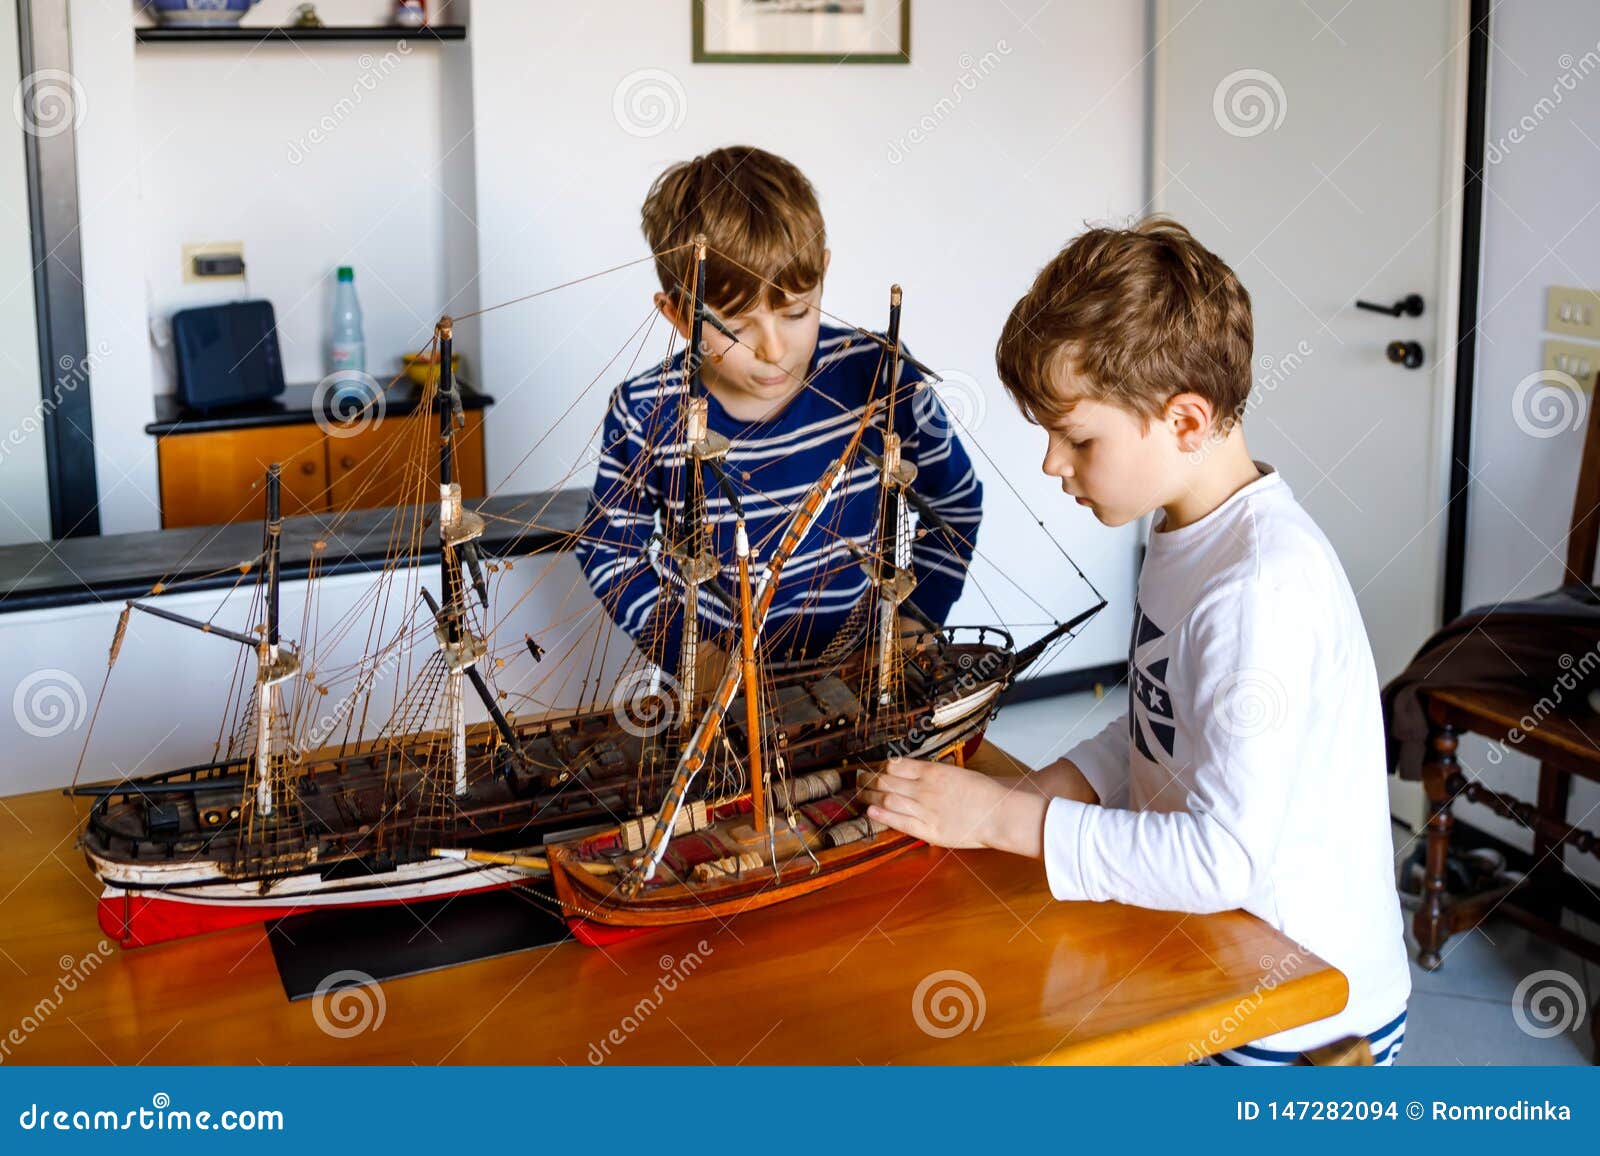 50+ Model Ship Building Stock Photos, Pictures & Royalty-Free